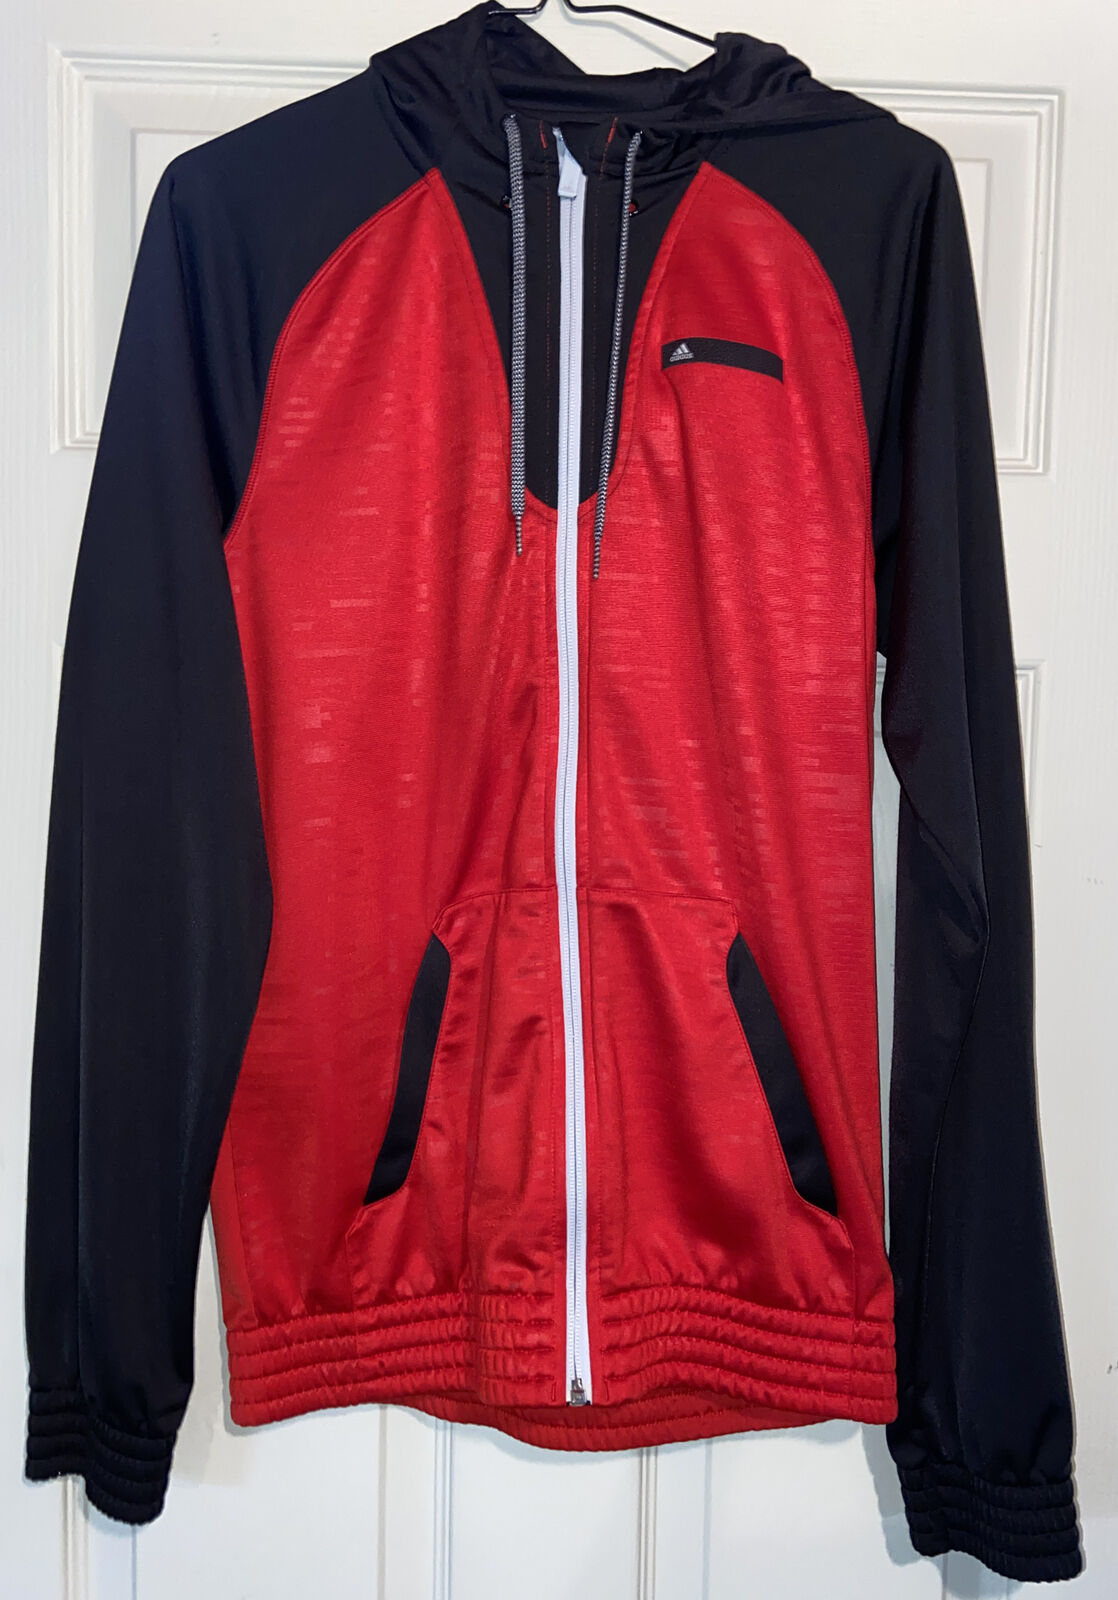 Adidas Jacket Size Youth Red with Max 56% OFF Black Athletic Industry No. 1 Sleeves Zip Up